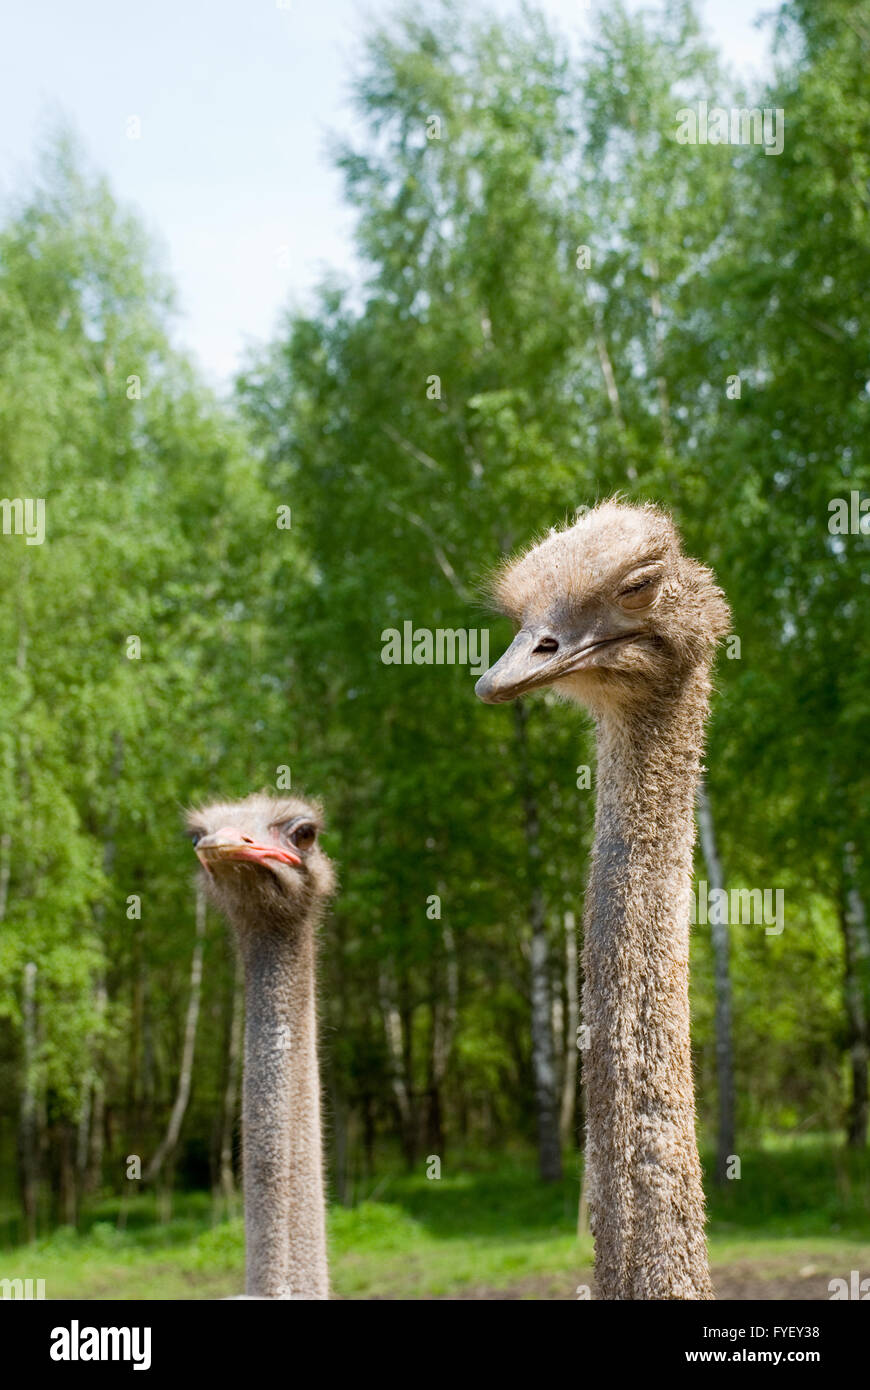 Portrait of ostriches on the nature Stock Photo